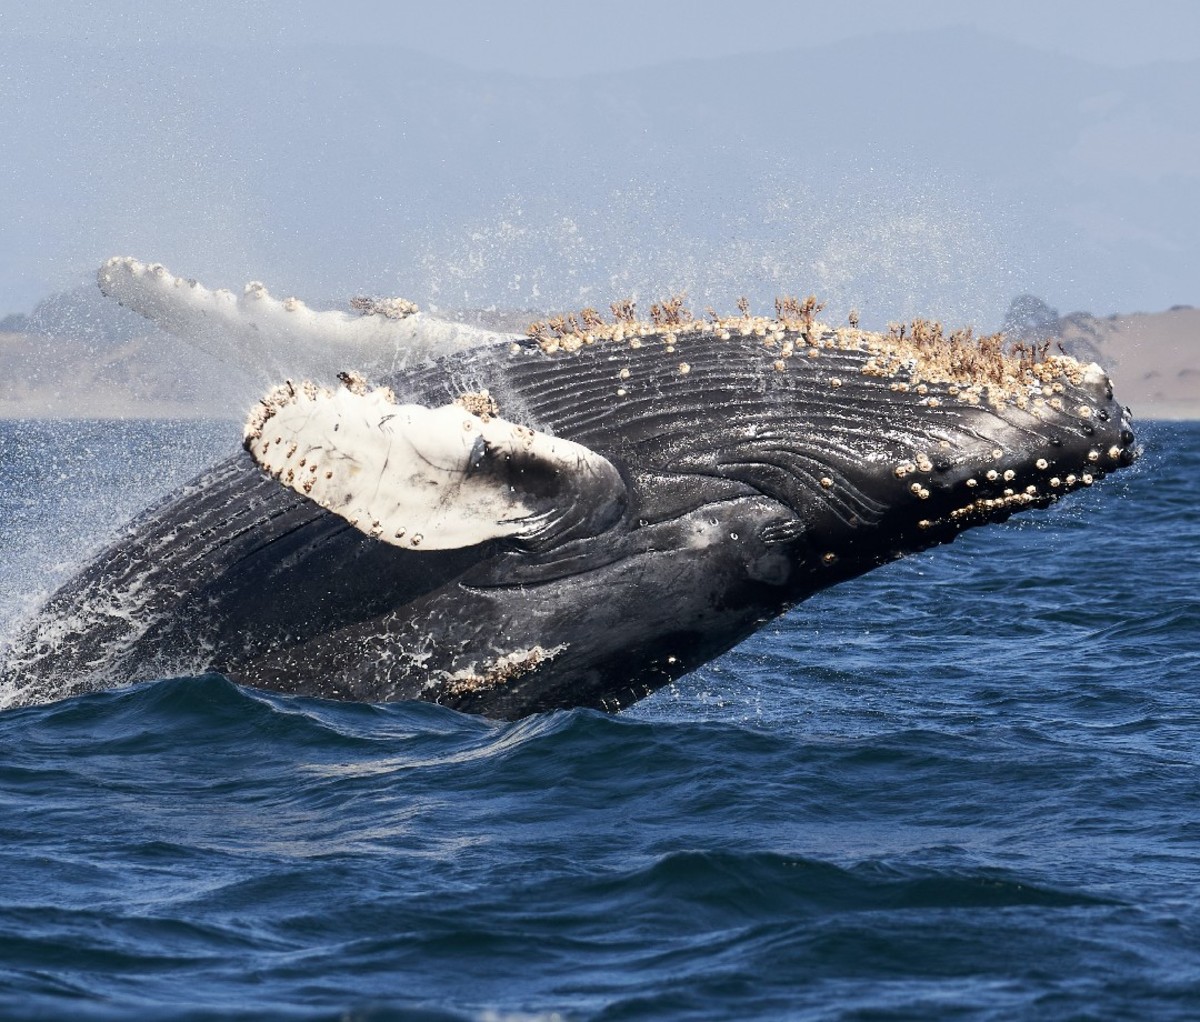 Humpback whale breaching out of water in California